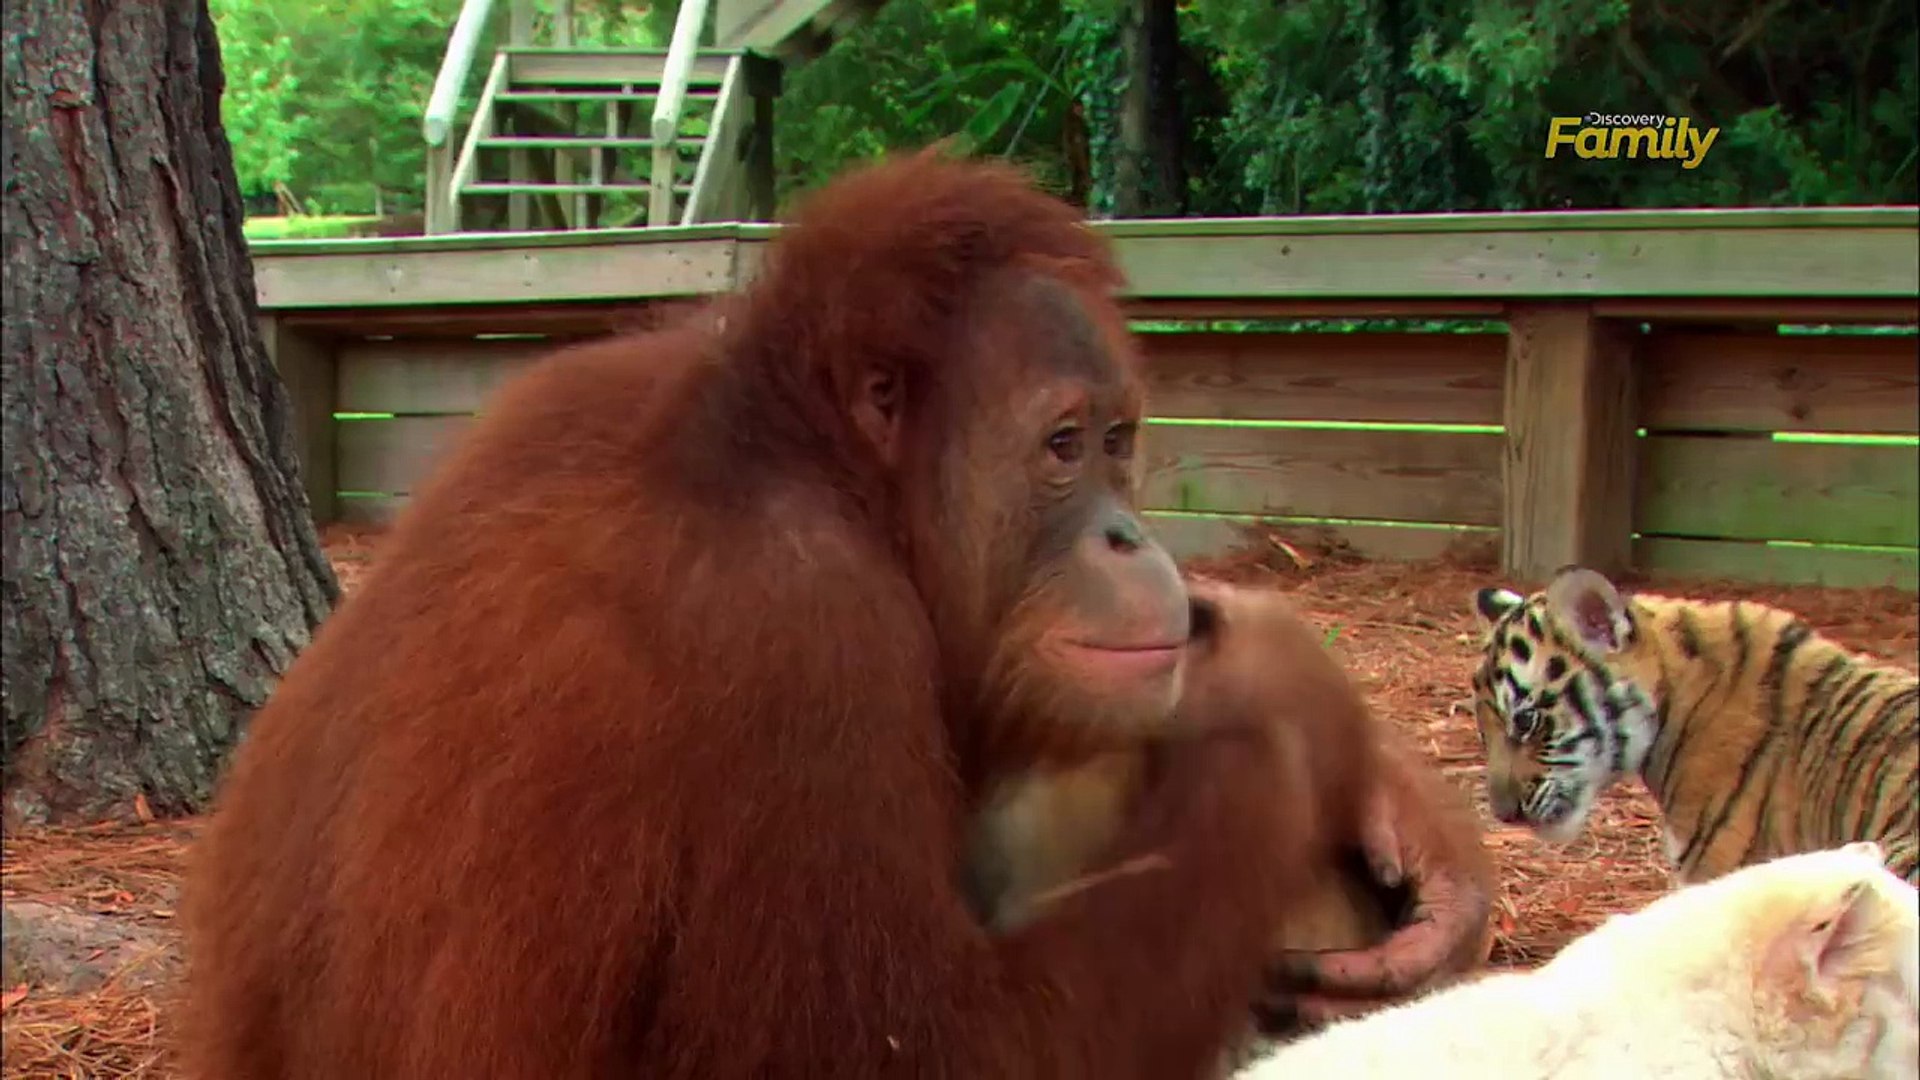 Extremely Touching Story: An Old Orangutan Mother Who Adopted And Cared For An Orphan Tiger Like Her Own Has Captivated The Online Community. - Viet Network